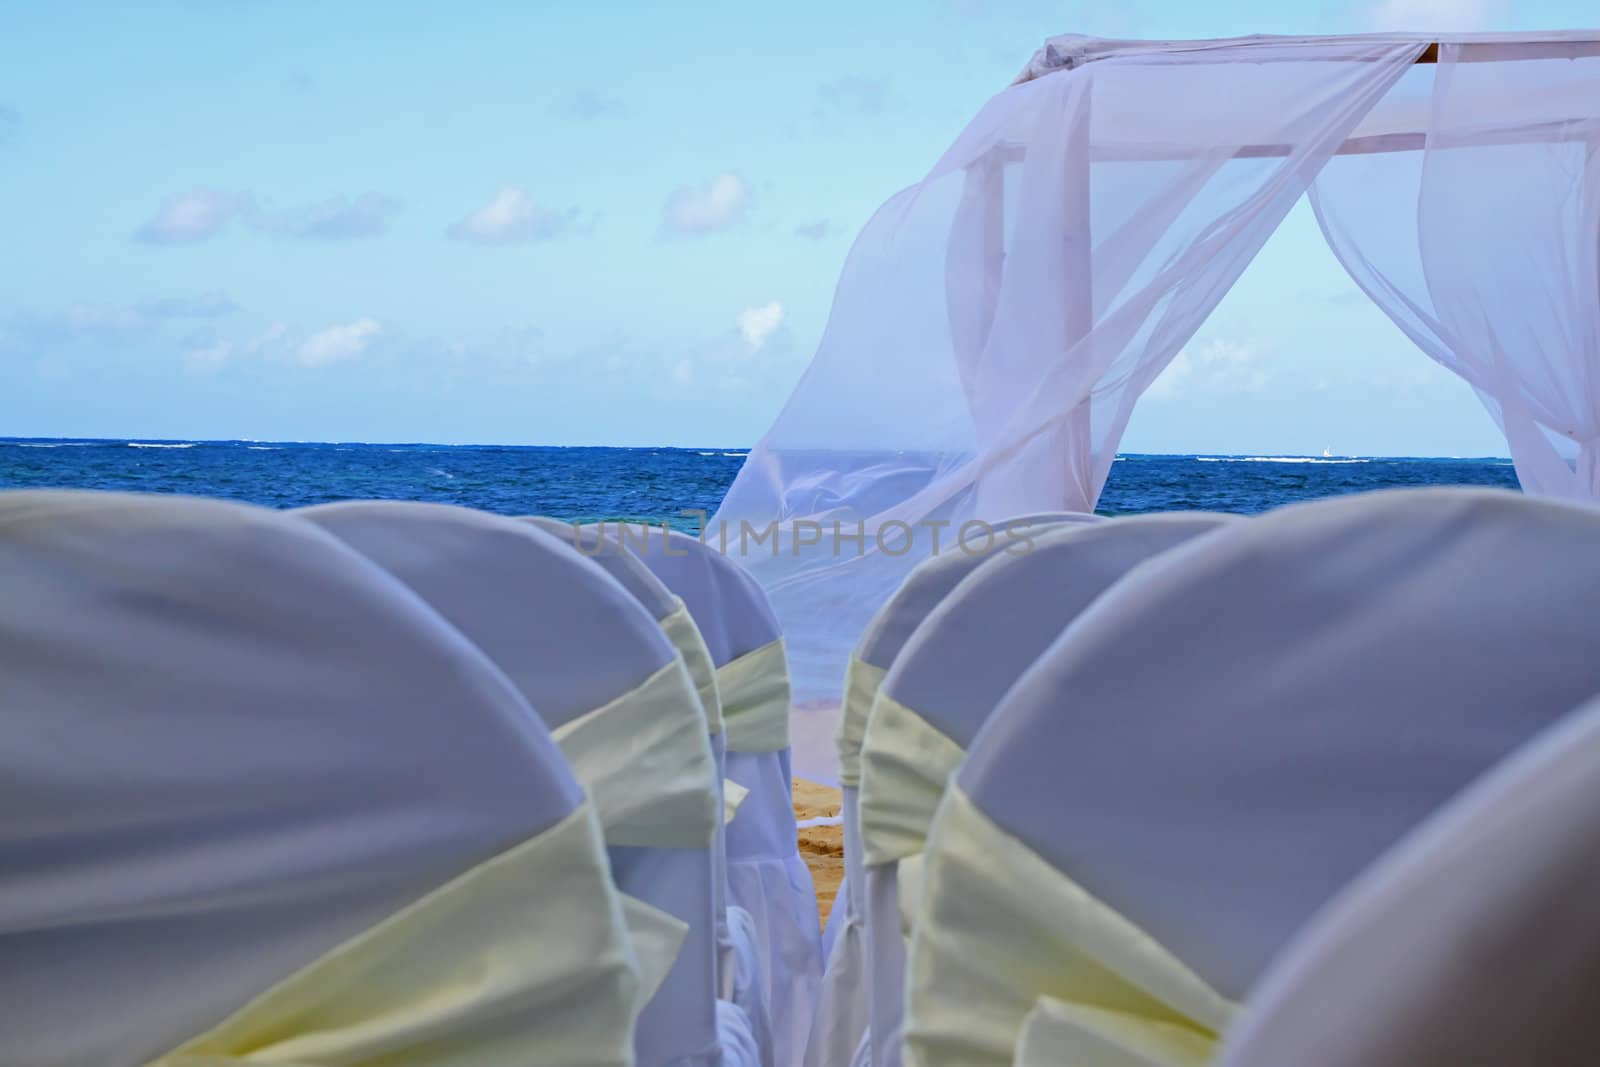 Ribons on chairs laid out for a tropical wedding